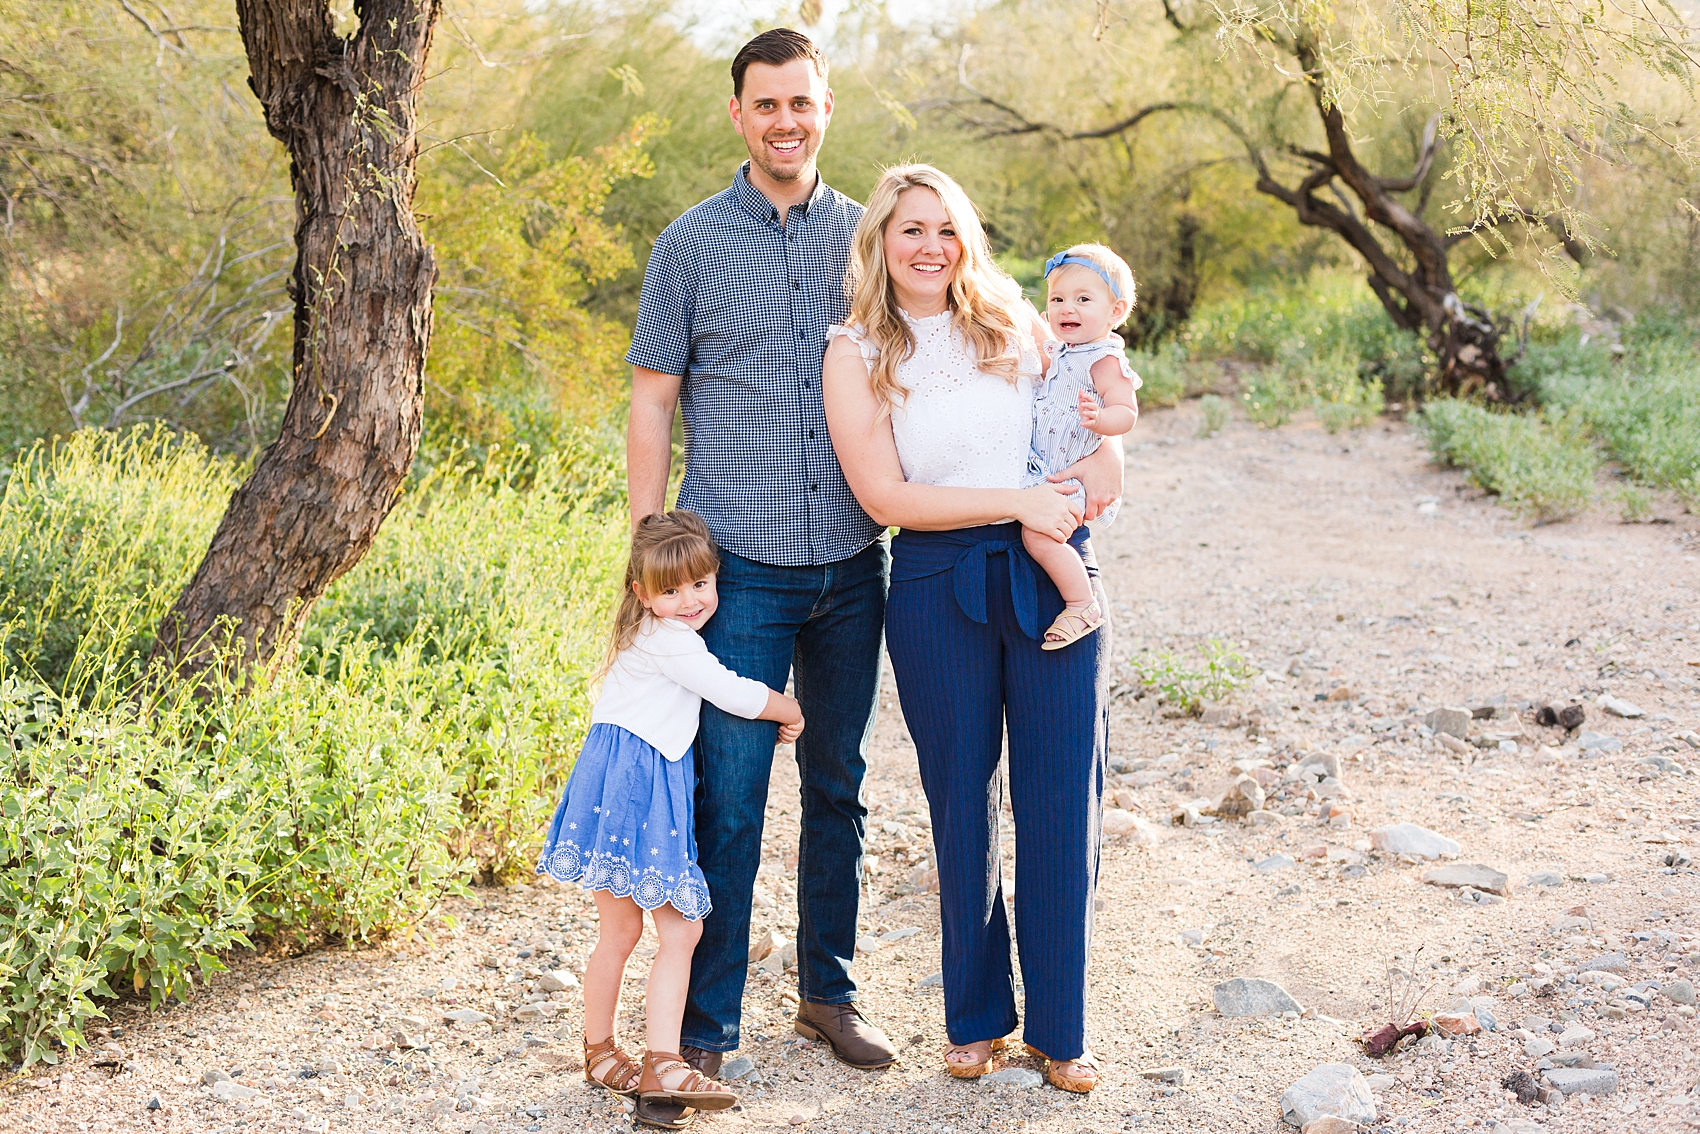 Leah Hope Photography | Scottsdale Phoenix Arizona Photographer | Paradise Valley Home | Family Pictures | Child Family Photos | What to Wear | Family Poses